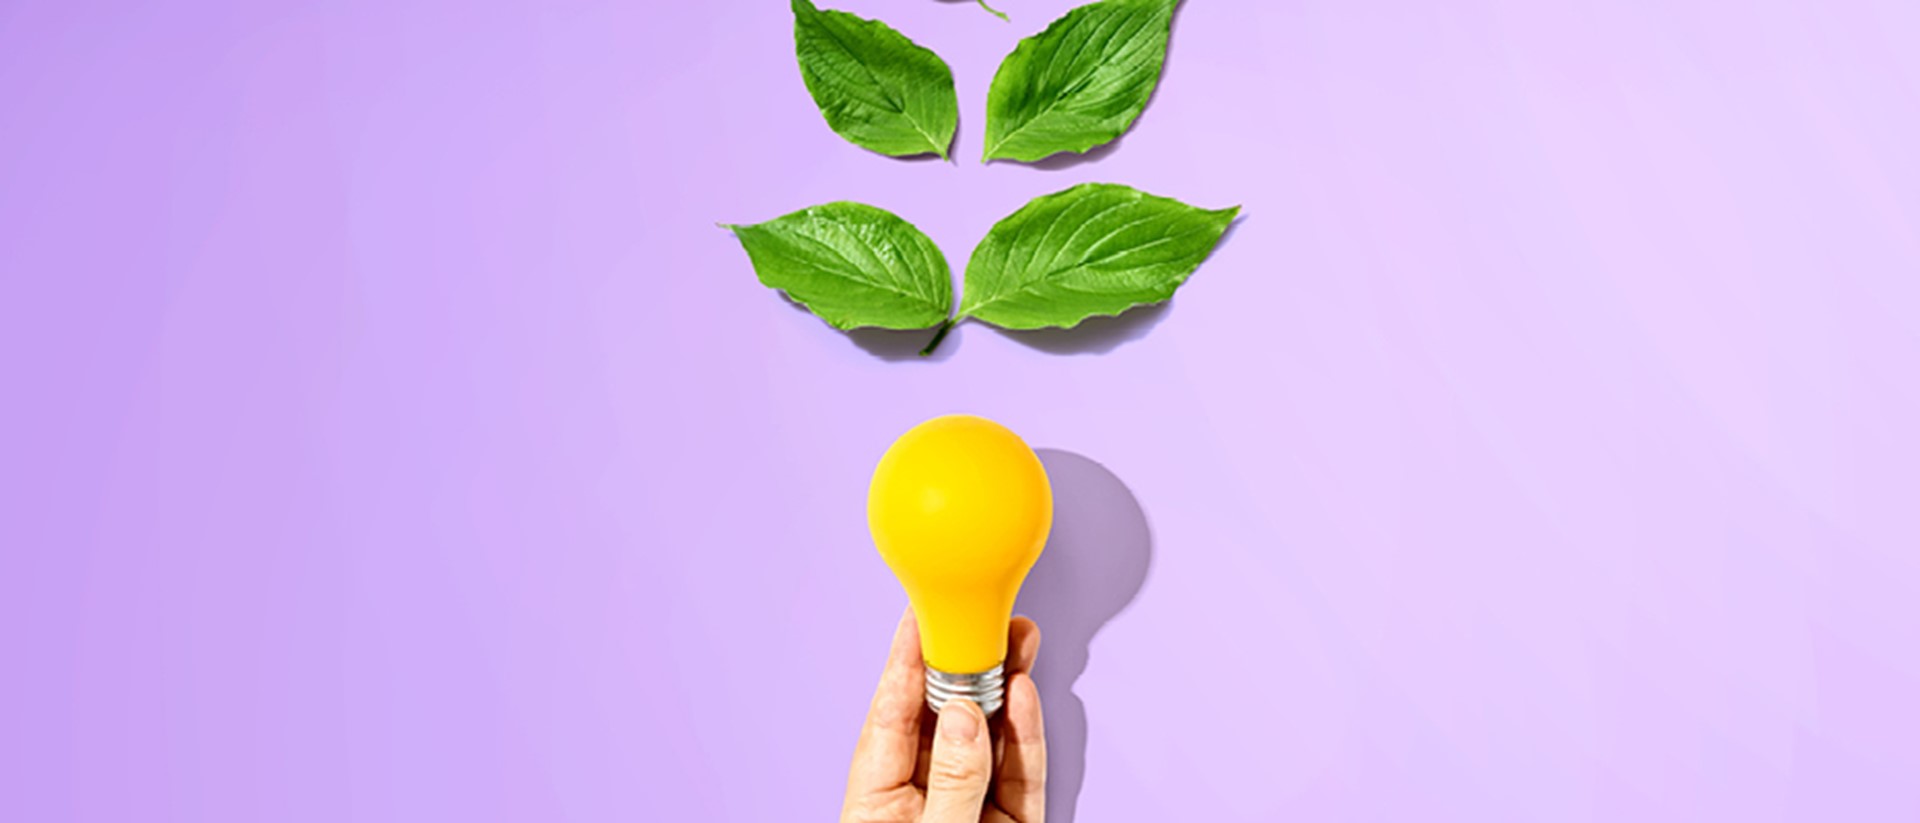 Image of a yellow lightbulb with green leaves above on a purple background